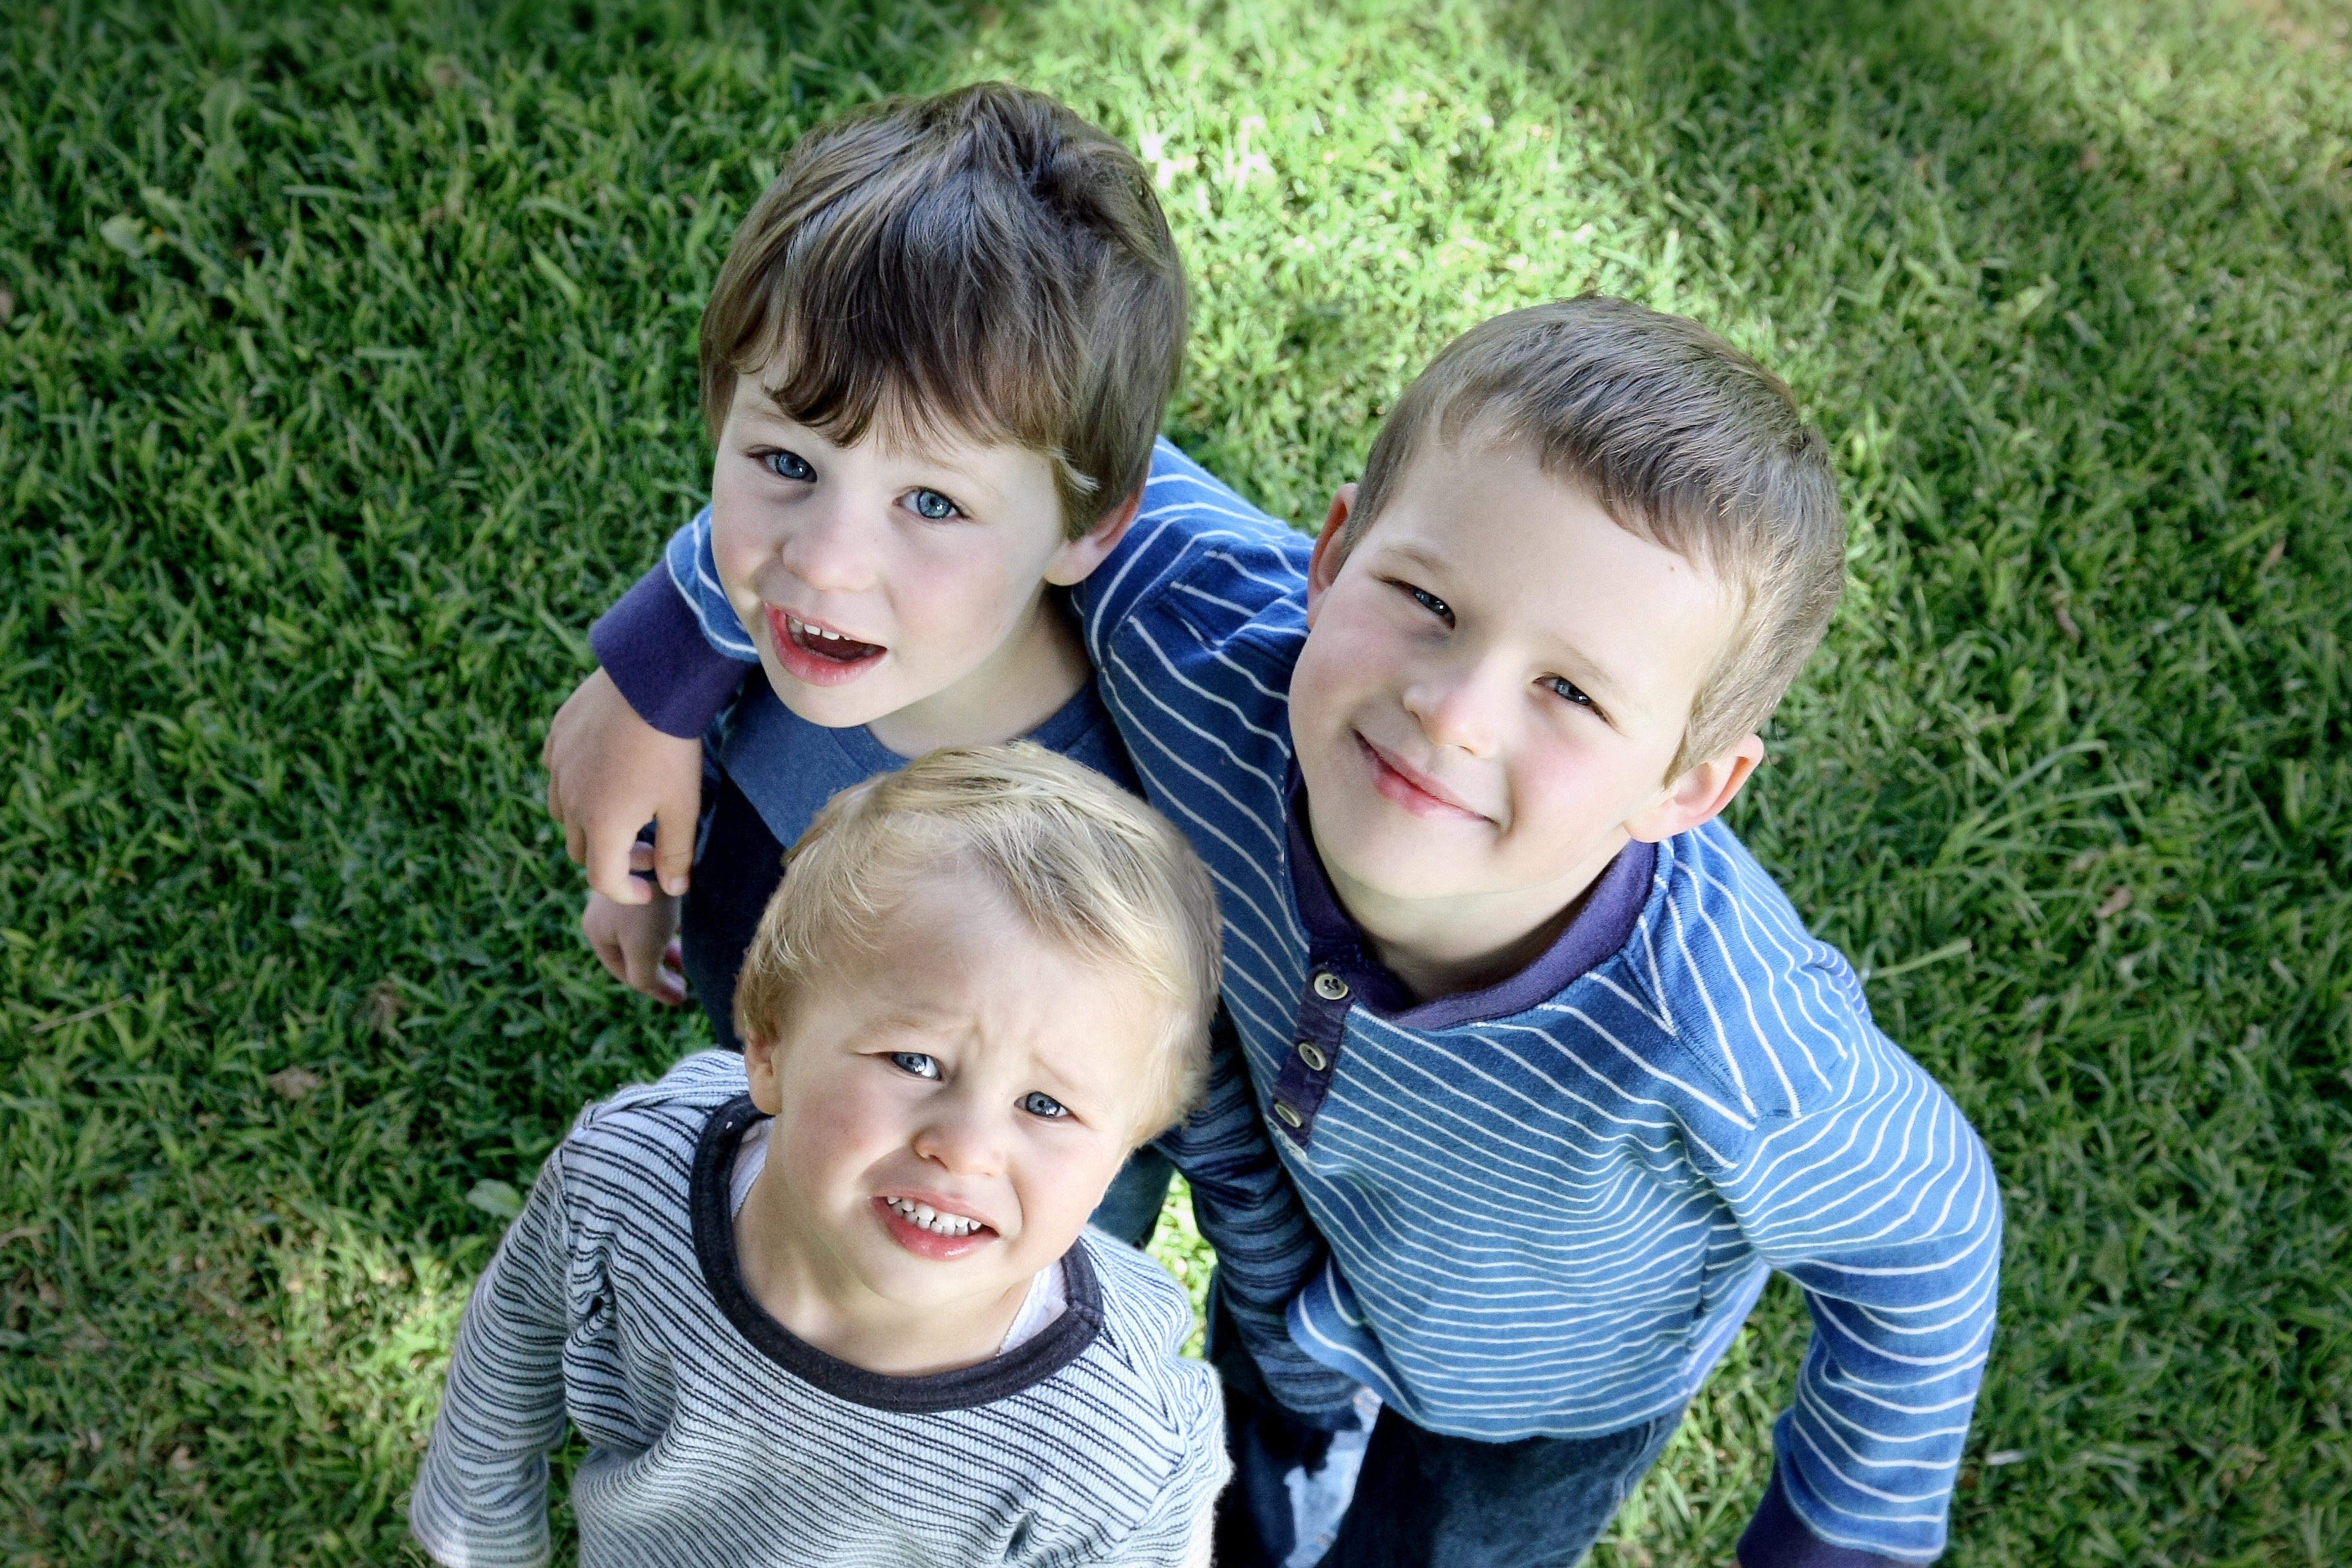 Three brothers aged 2-7 years